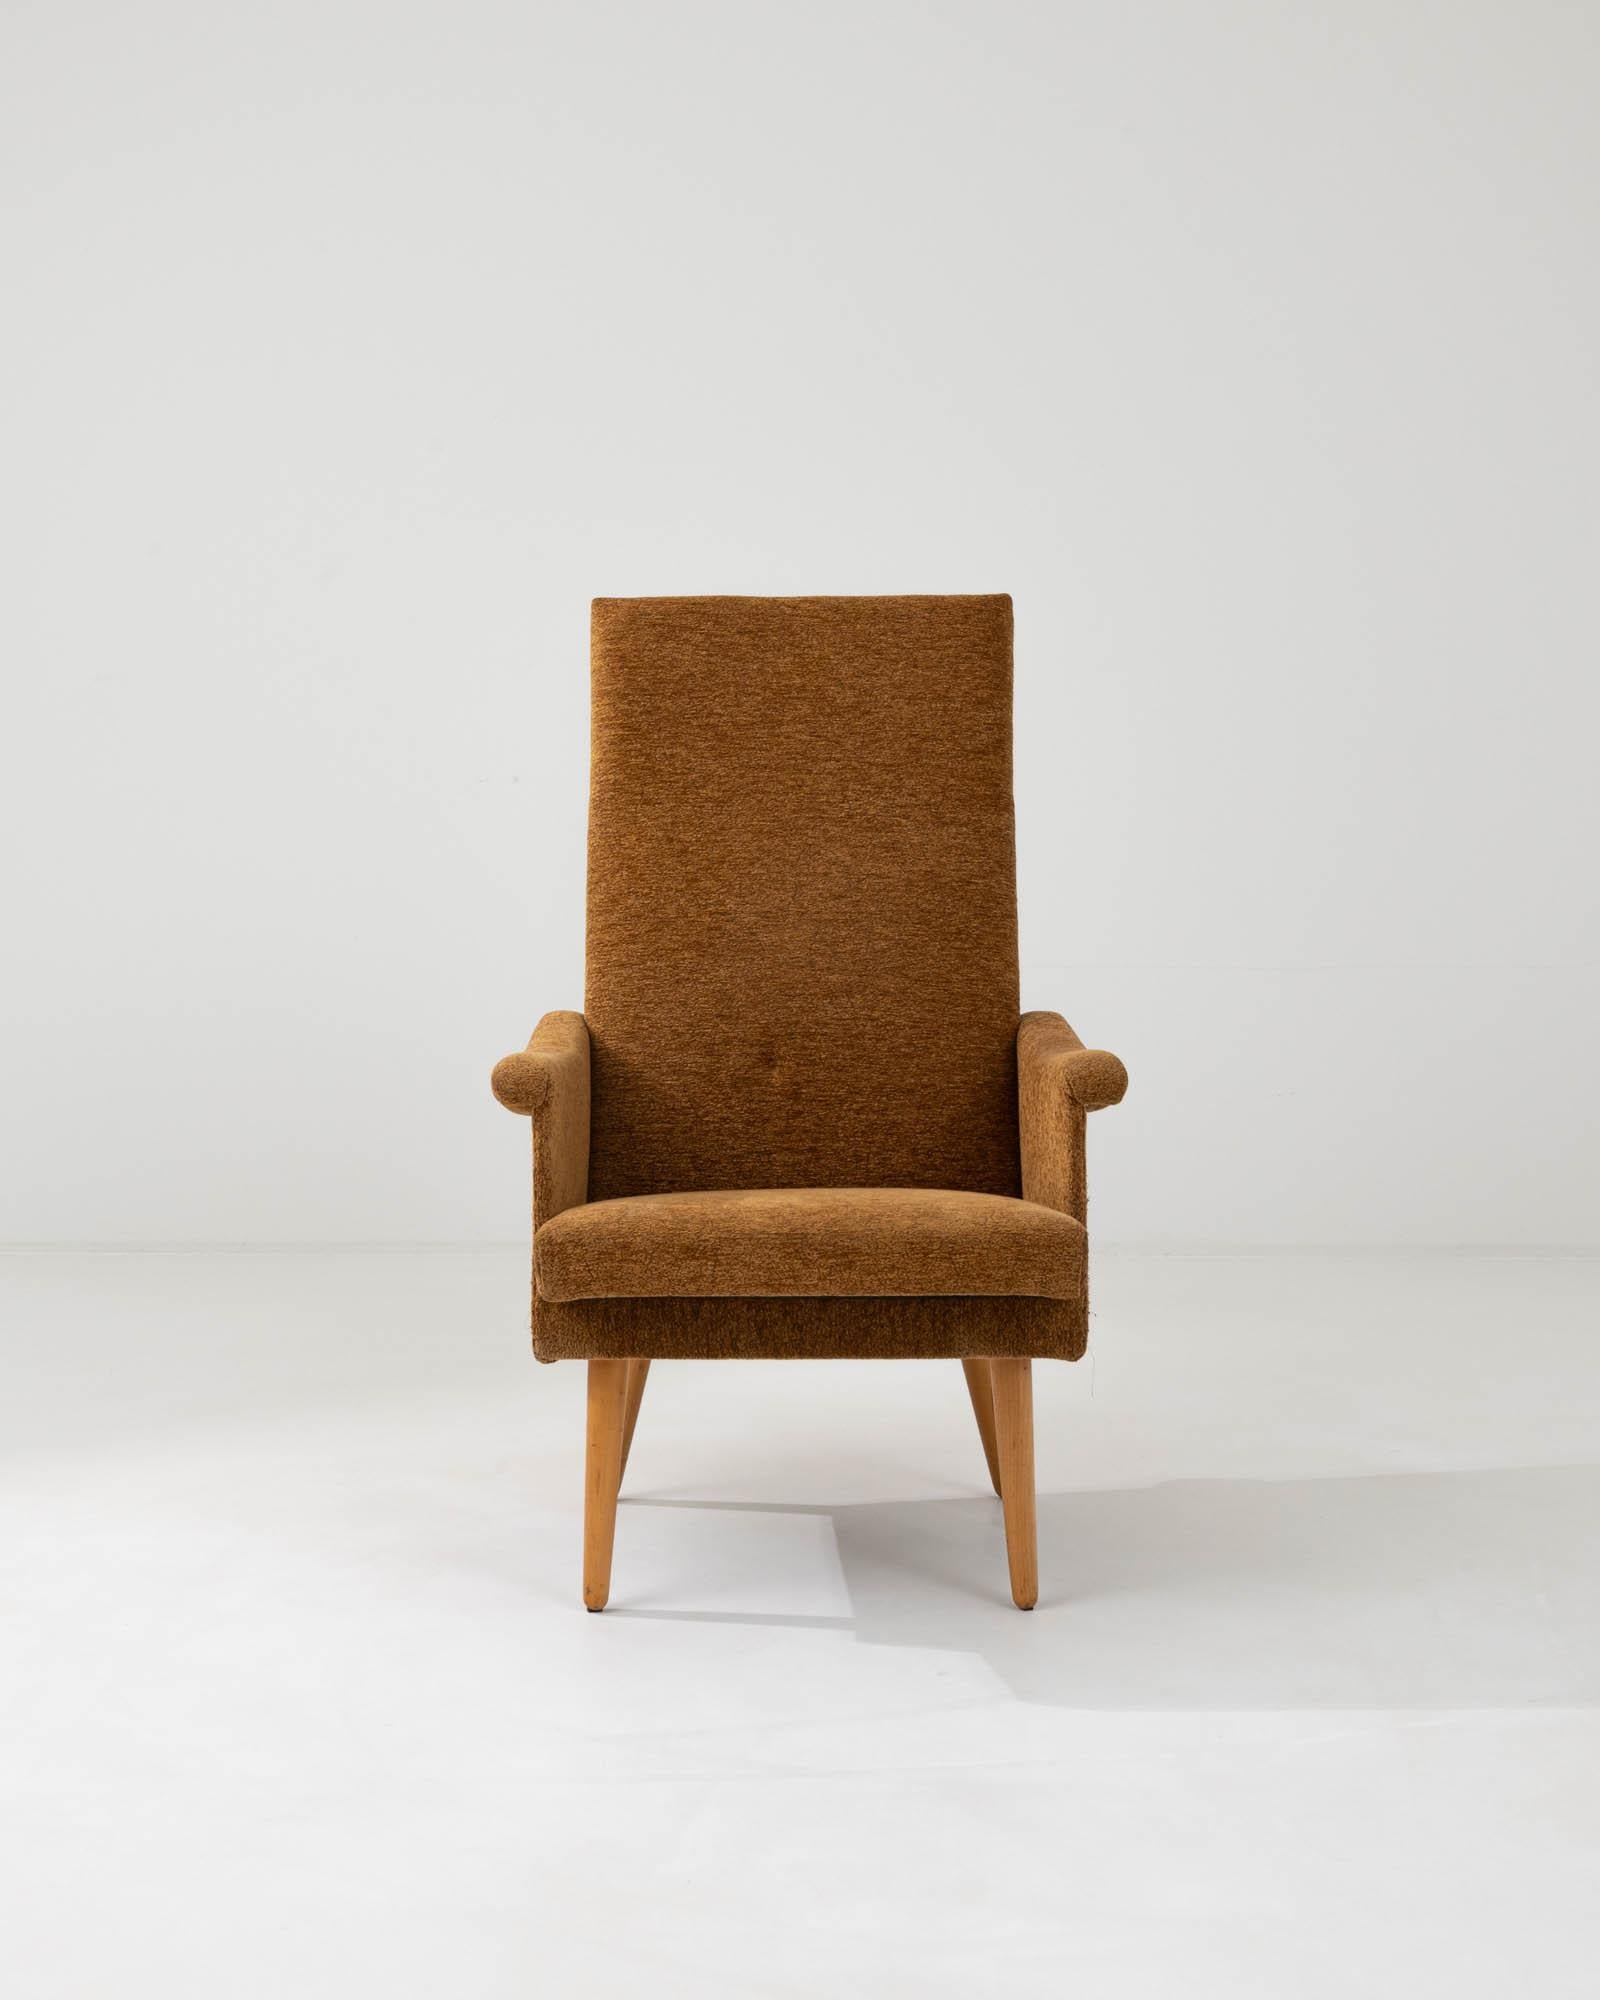 The boucle upholstering of this chair matches its legs’ warm earthy color. The soft curves of this Eastern European modern Czech chair from the twentieth century hold an everlasting style and elegance that has endured for decades, taking influences